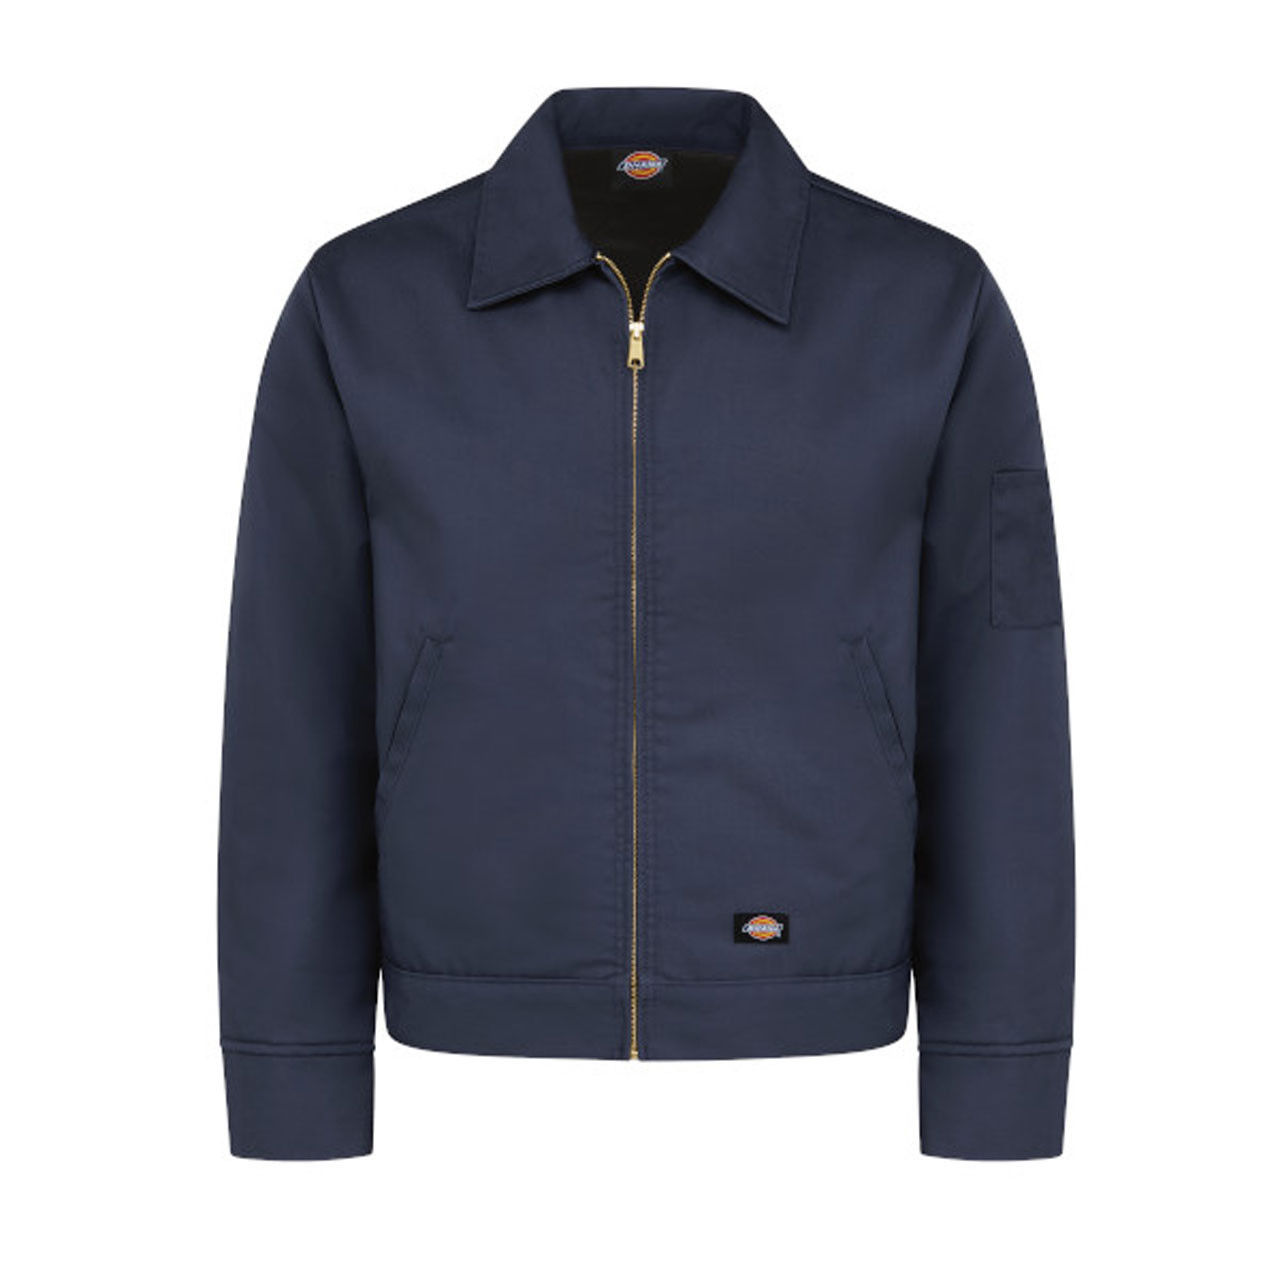 What is the design inspiration behind the Dickies Eisenhower Jacket?